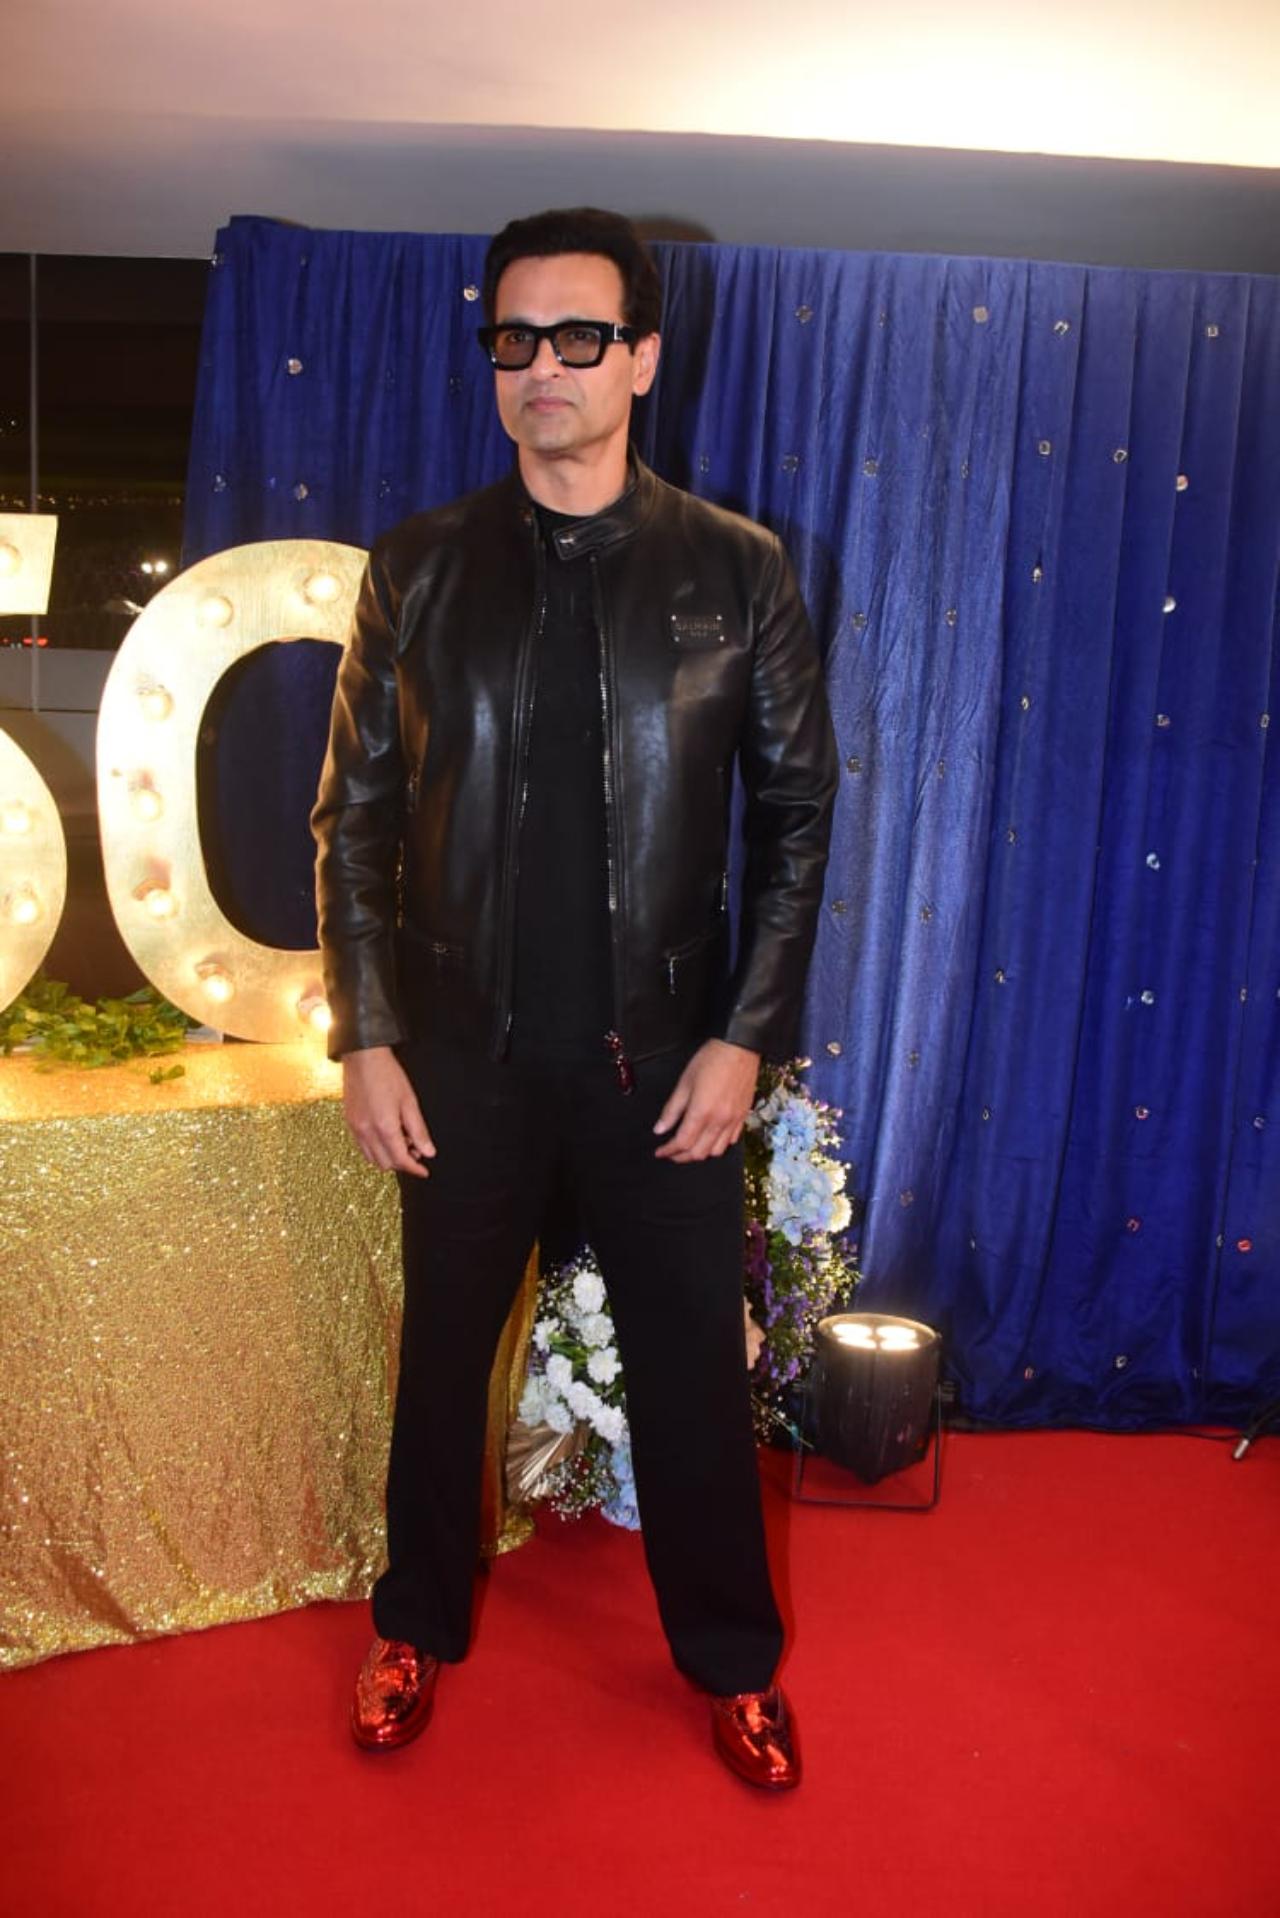 Rohit Roy seemed ready to dance in his all black suit and leather jacket. His glitsy red shoes especially stole the show!